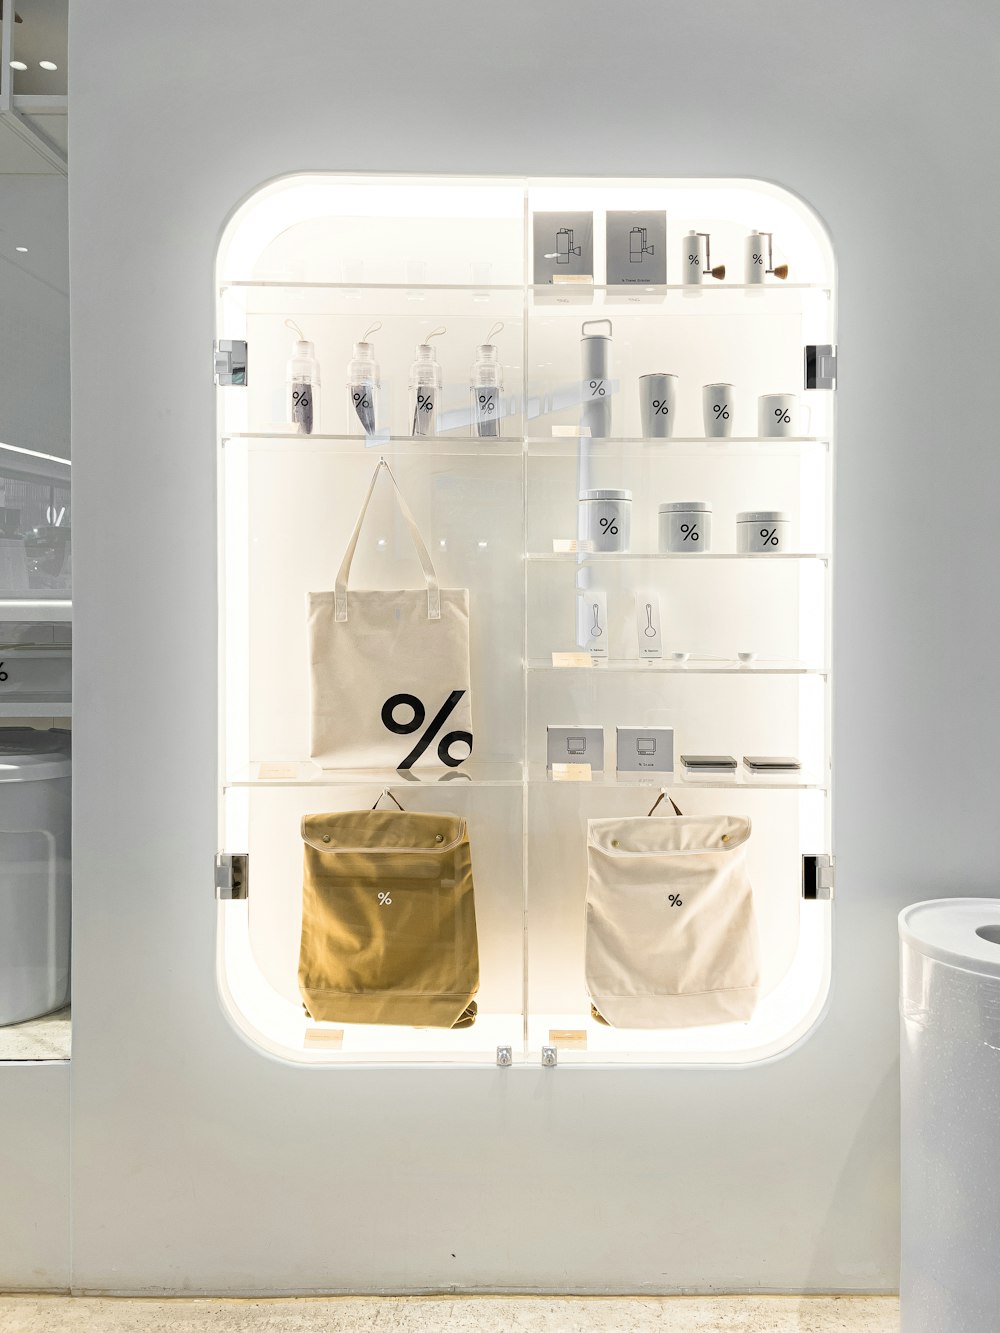 a display case in a store filled with bags